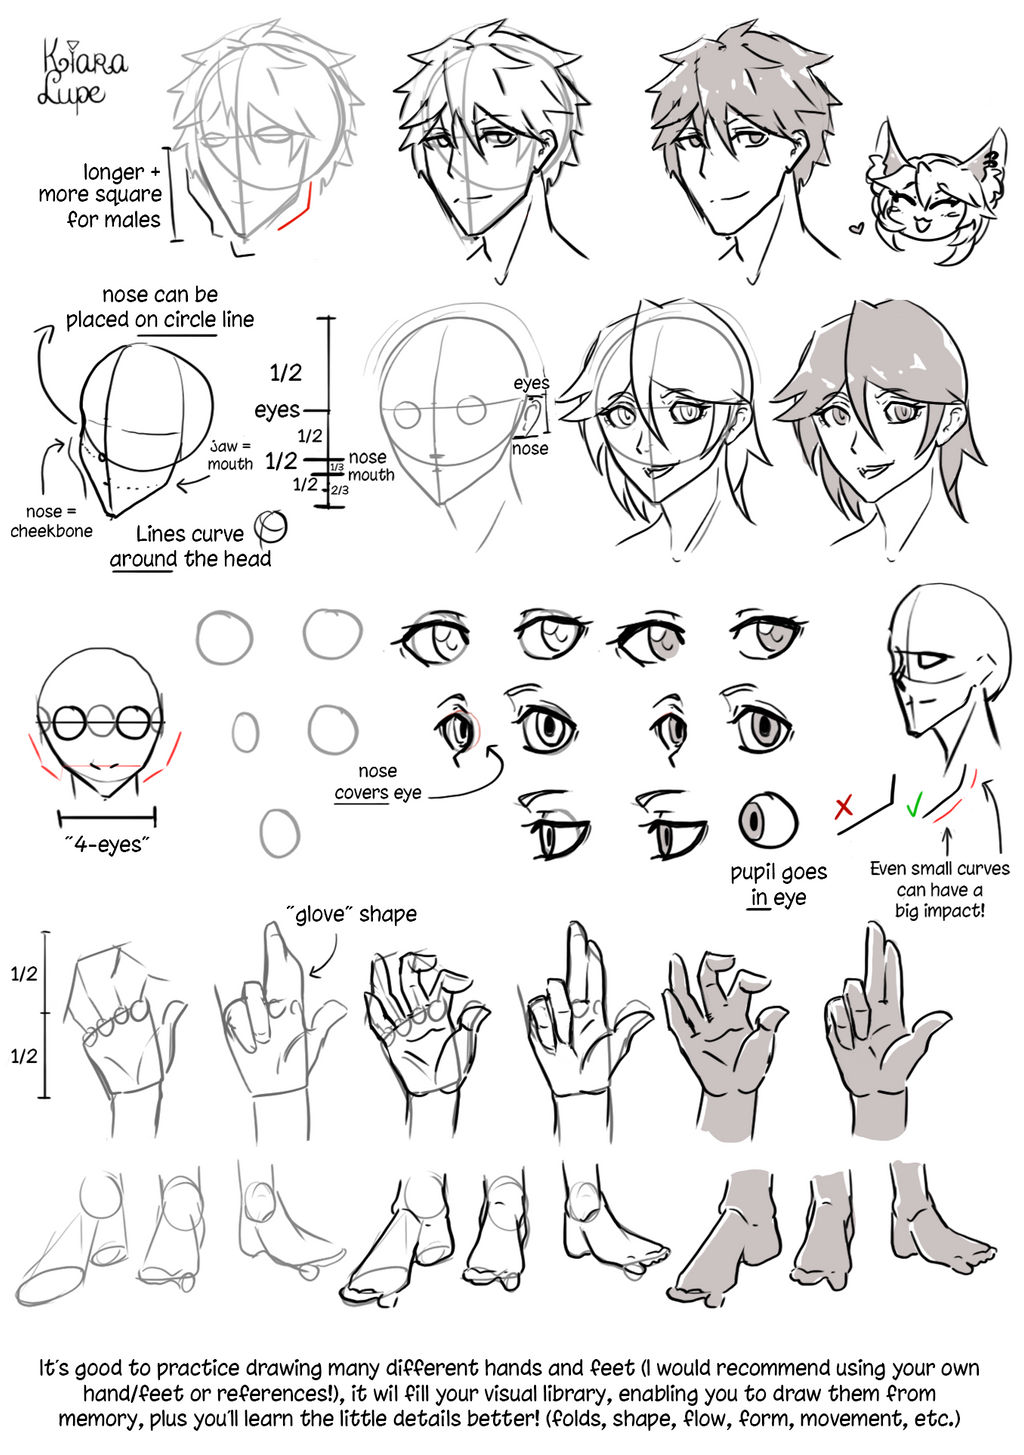 Learn Manga: How to draw the female head front by Naschi on DeviantArt